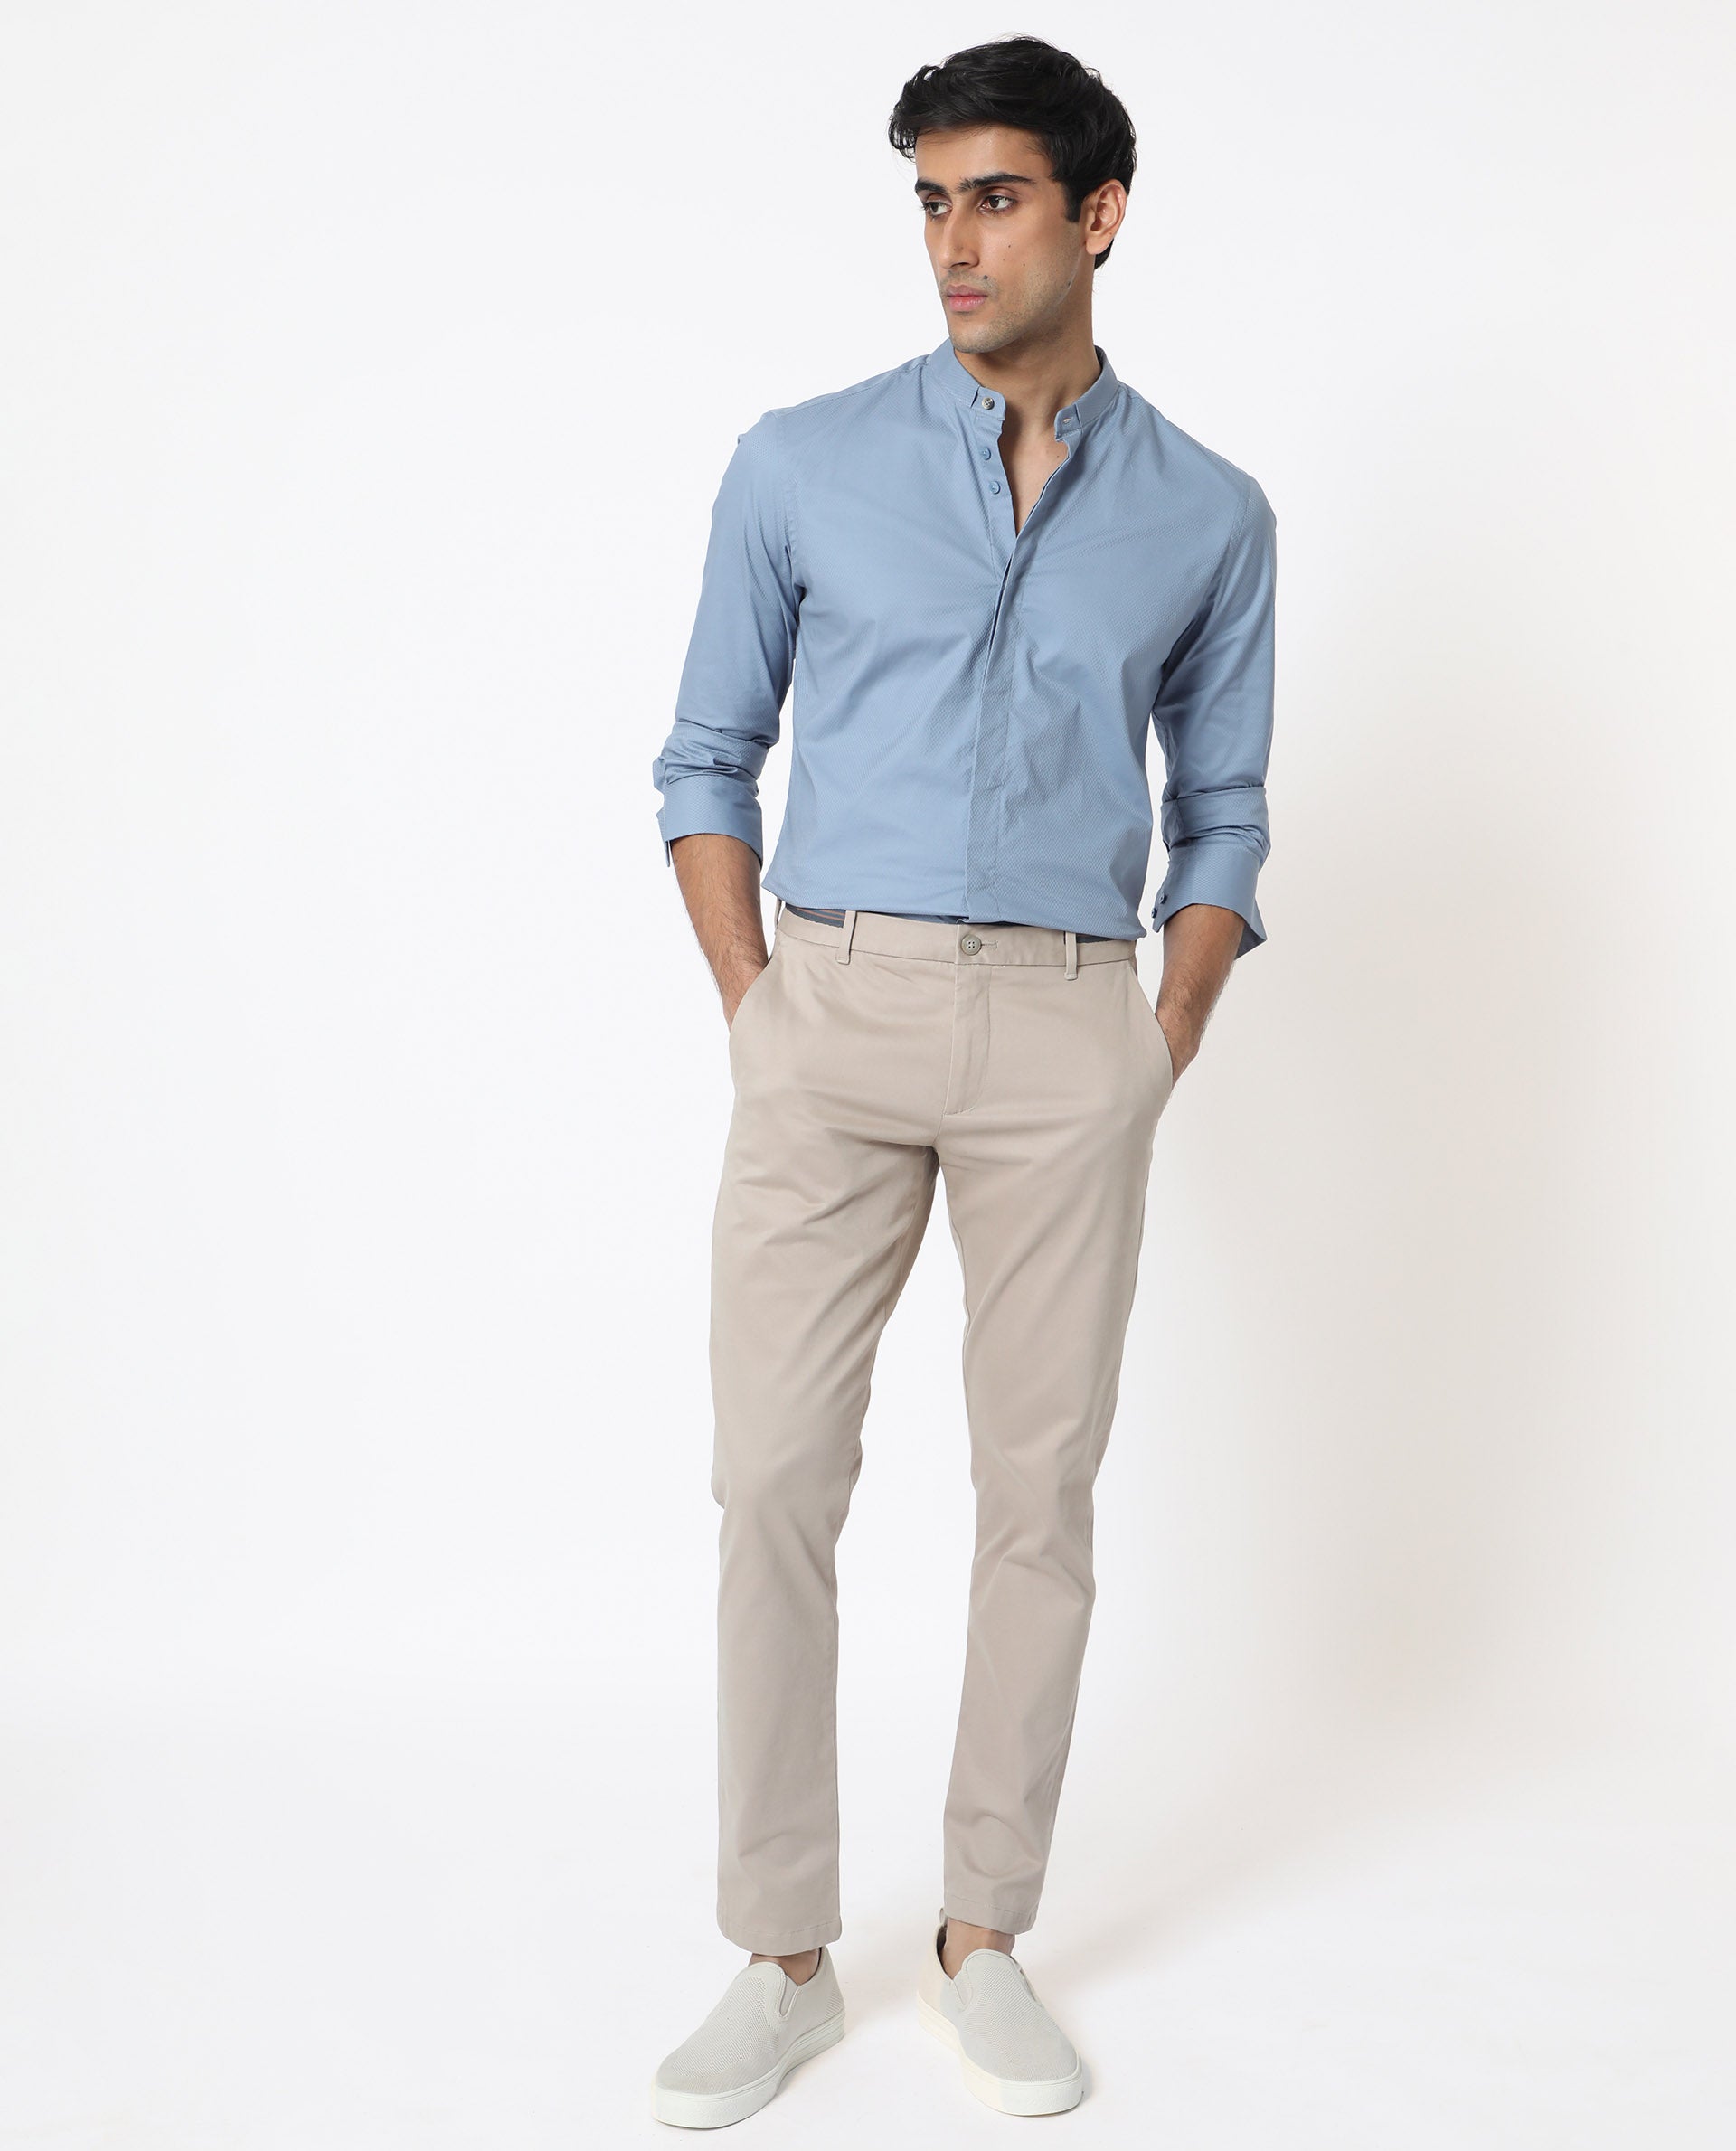 Beige Pants with Light Blue Shirt Summer Outfits For Men 410 ideas   outfits  Lookastic